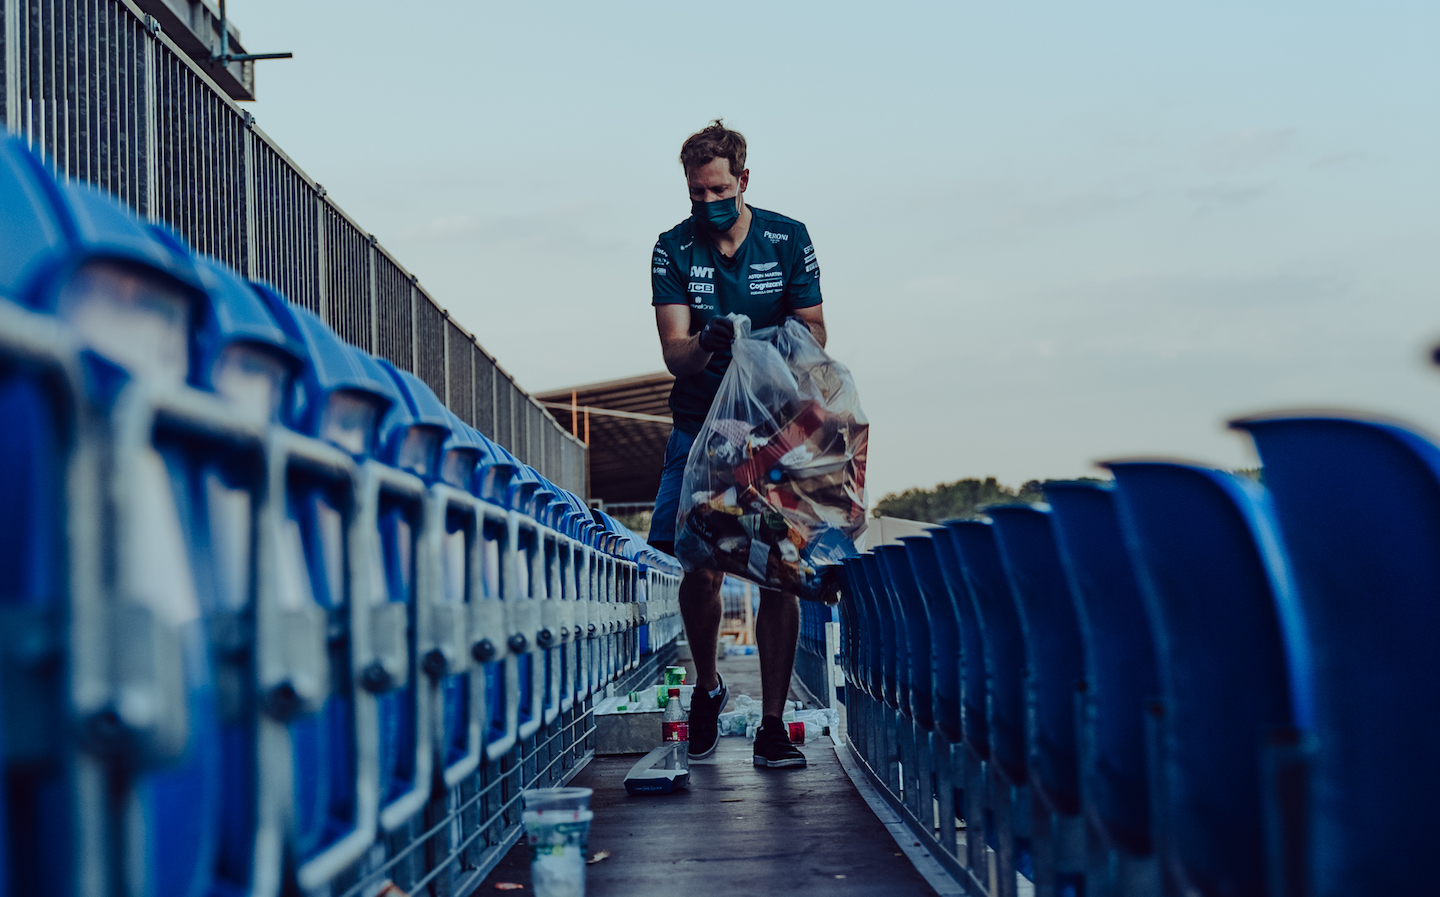 Vettel collects litter at Silverstone